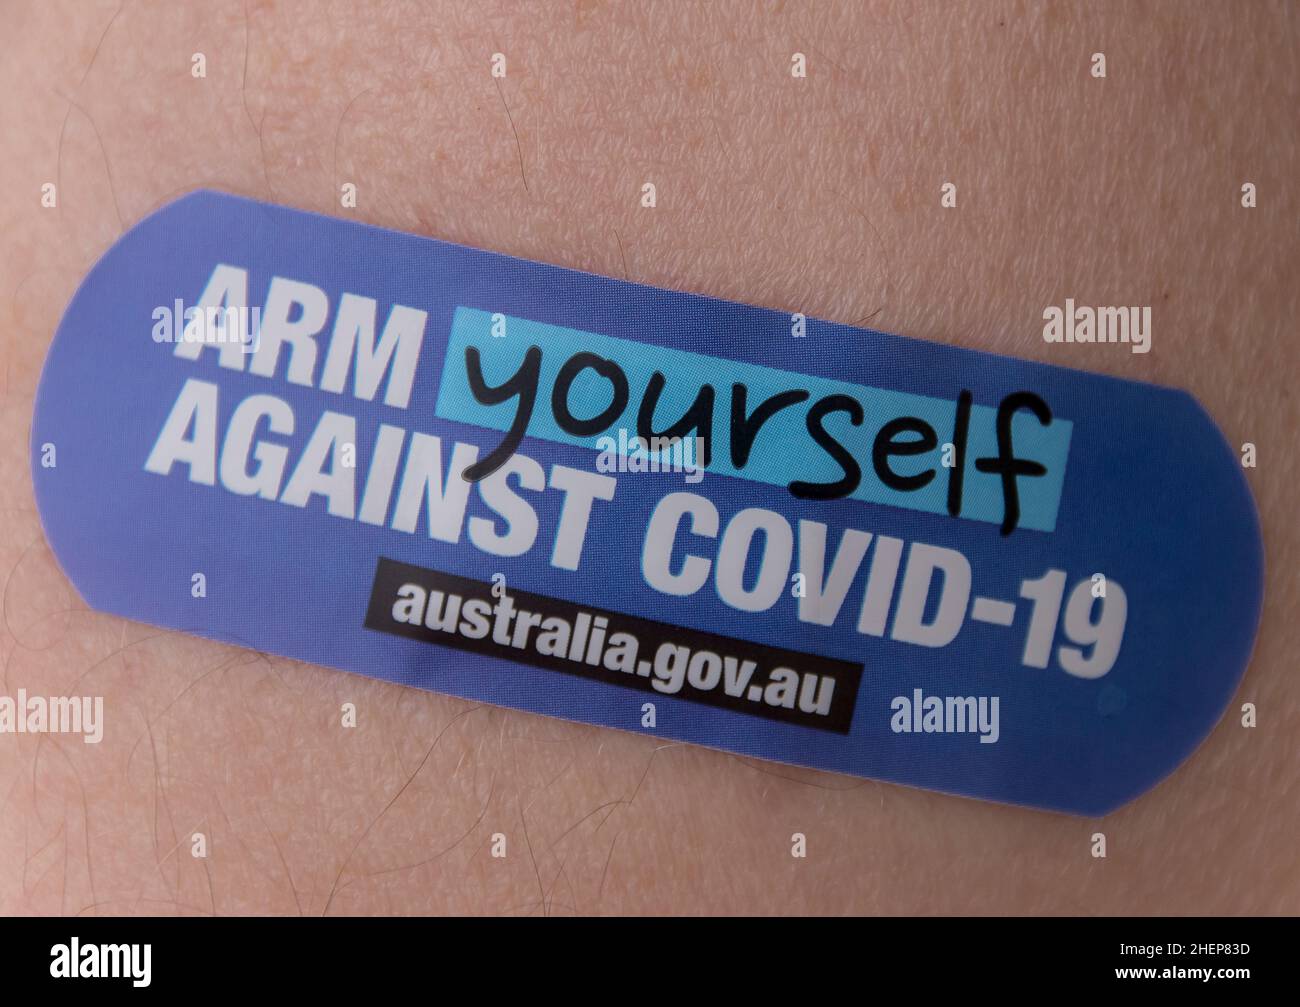 Australian government slogan on plaster (band-aid) stuck on arm after vaccination. Dressing on arm after jab. Public health message. Stock Photo